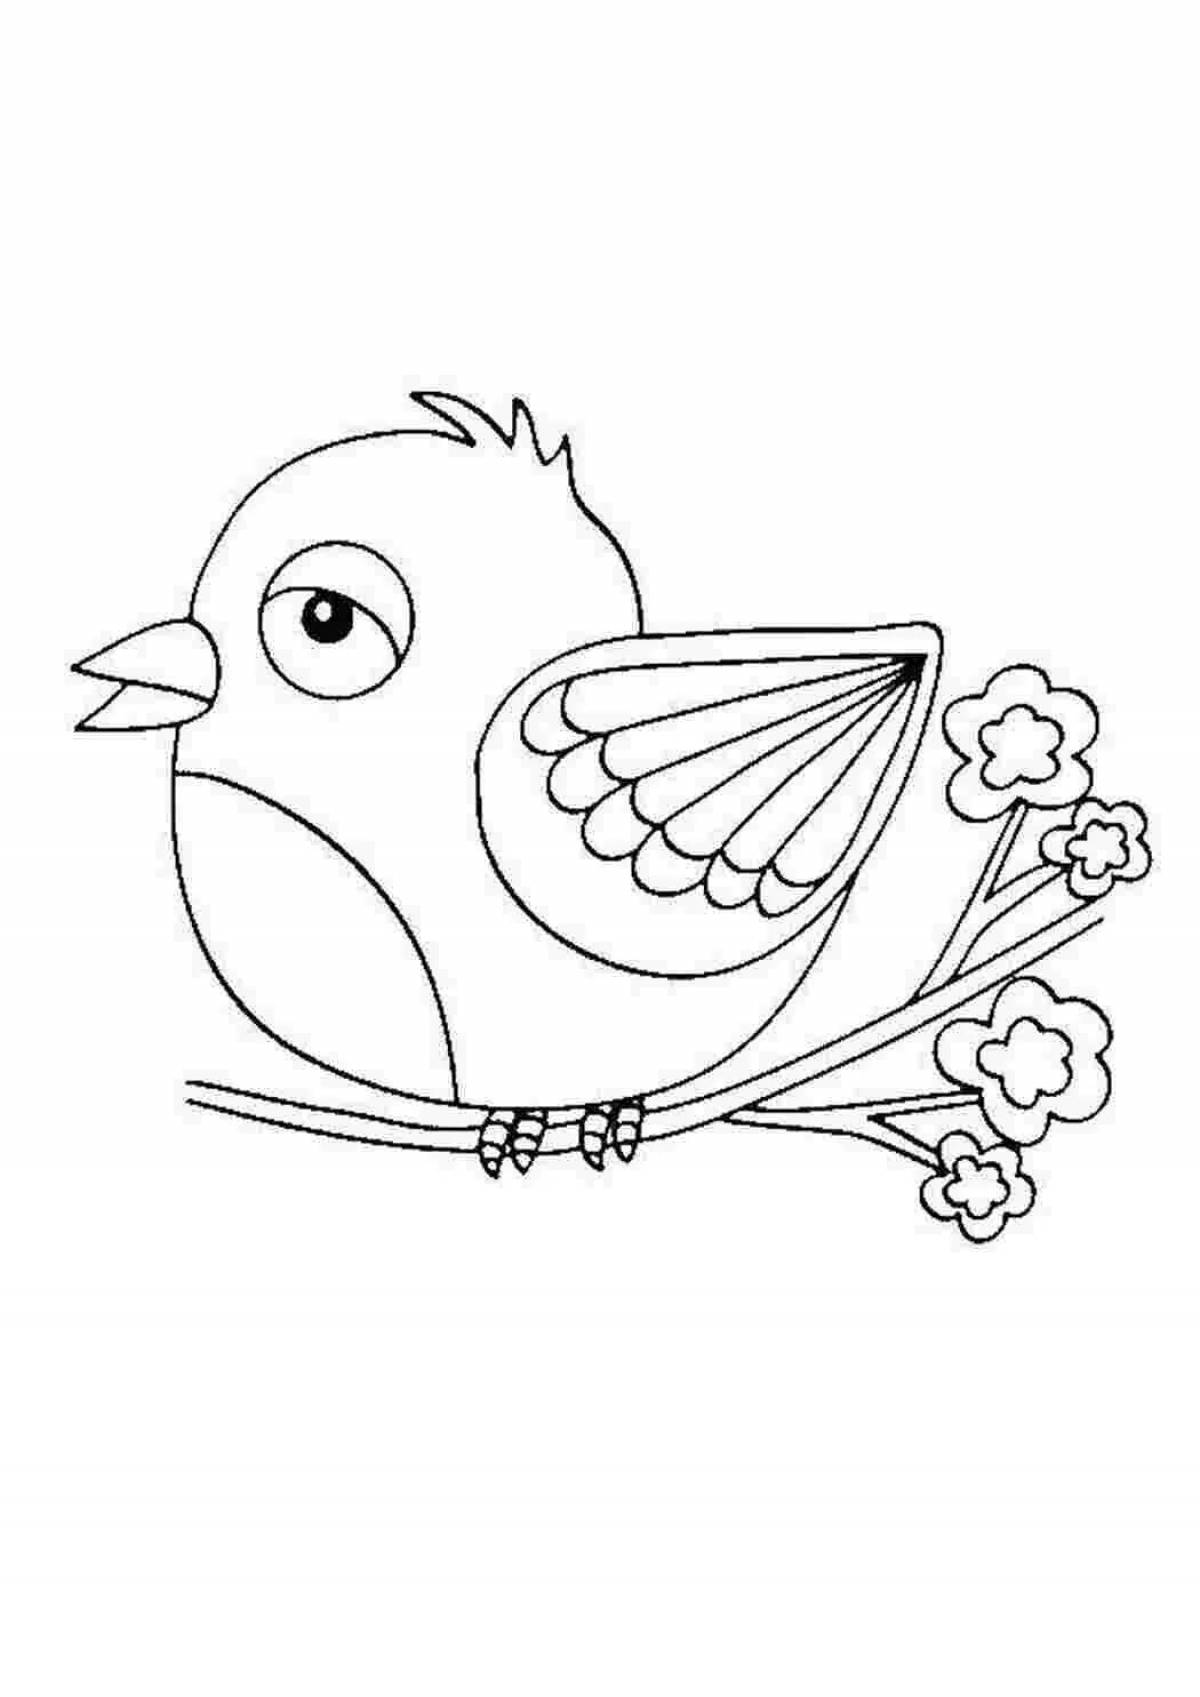 Grand coloring page bird drawing